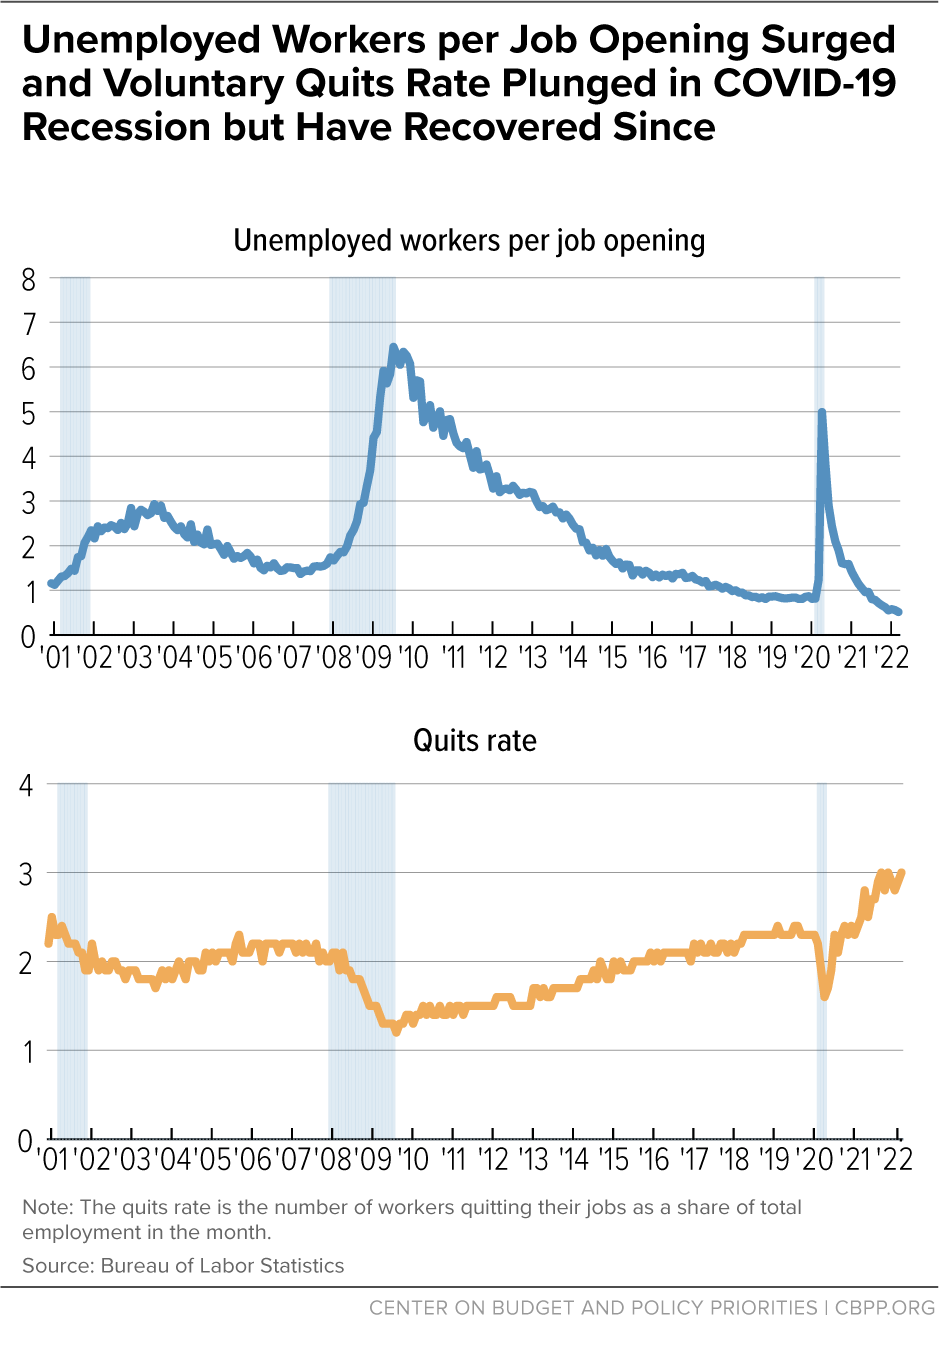 Unemployed Workers per Job Opening Surged and Voluntary Quits Rate Plunged in COVID-19 Recession but Have Been Recovering Since